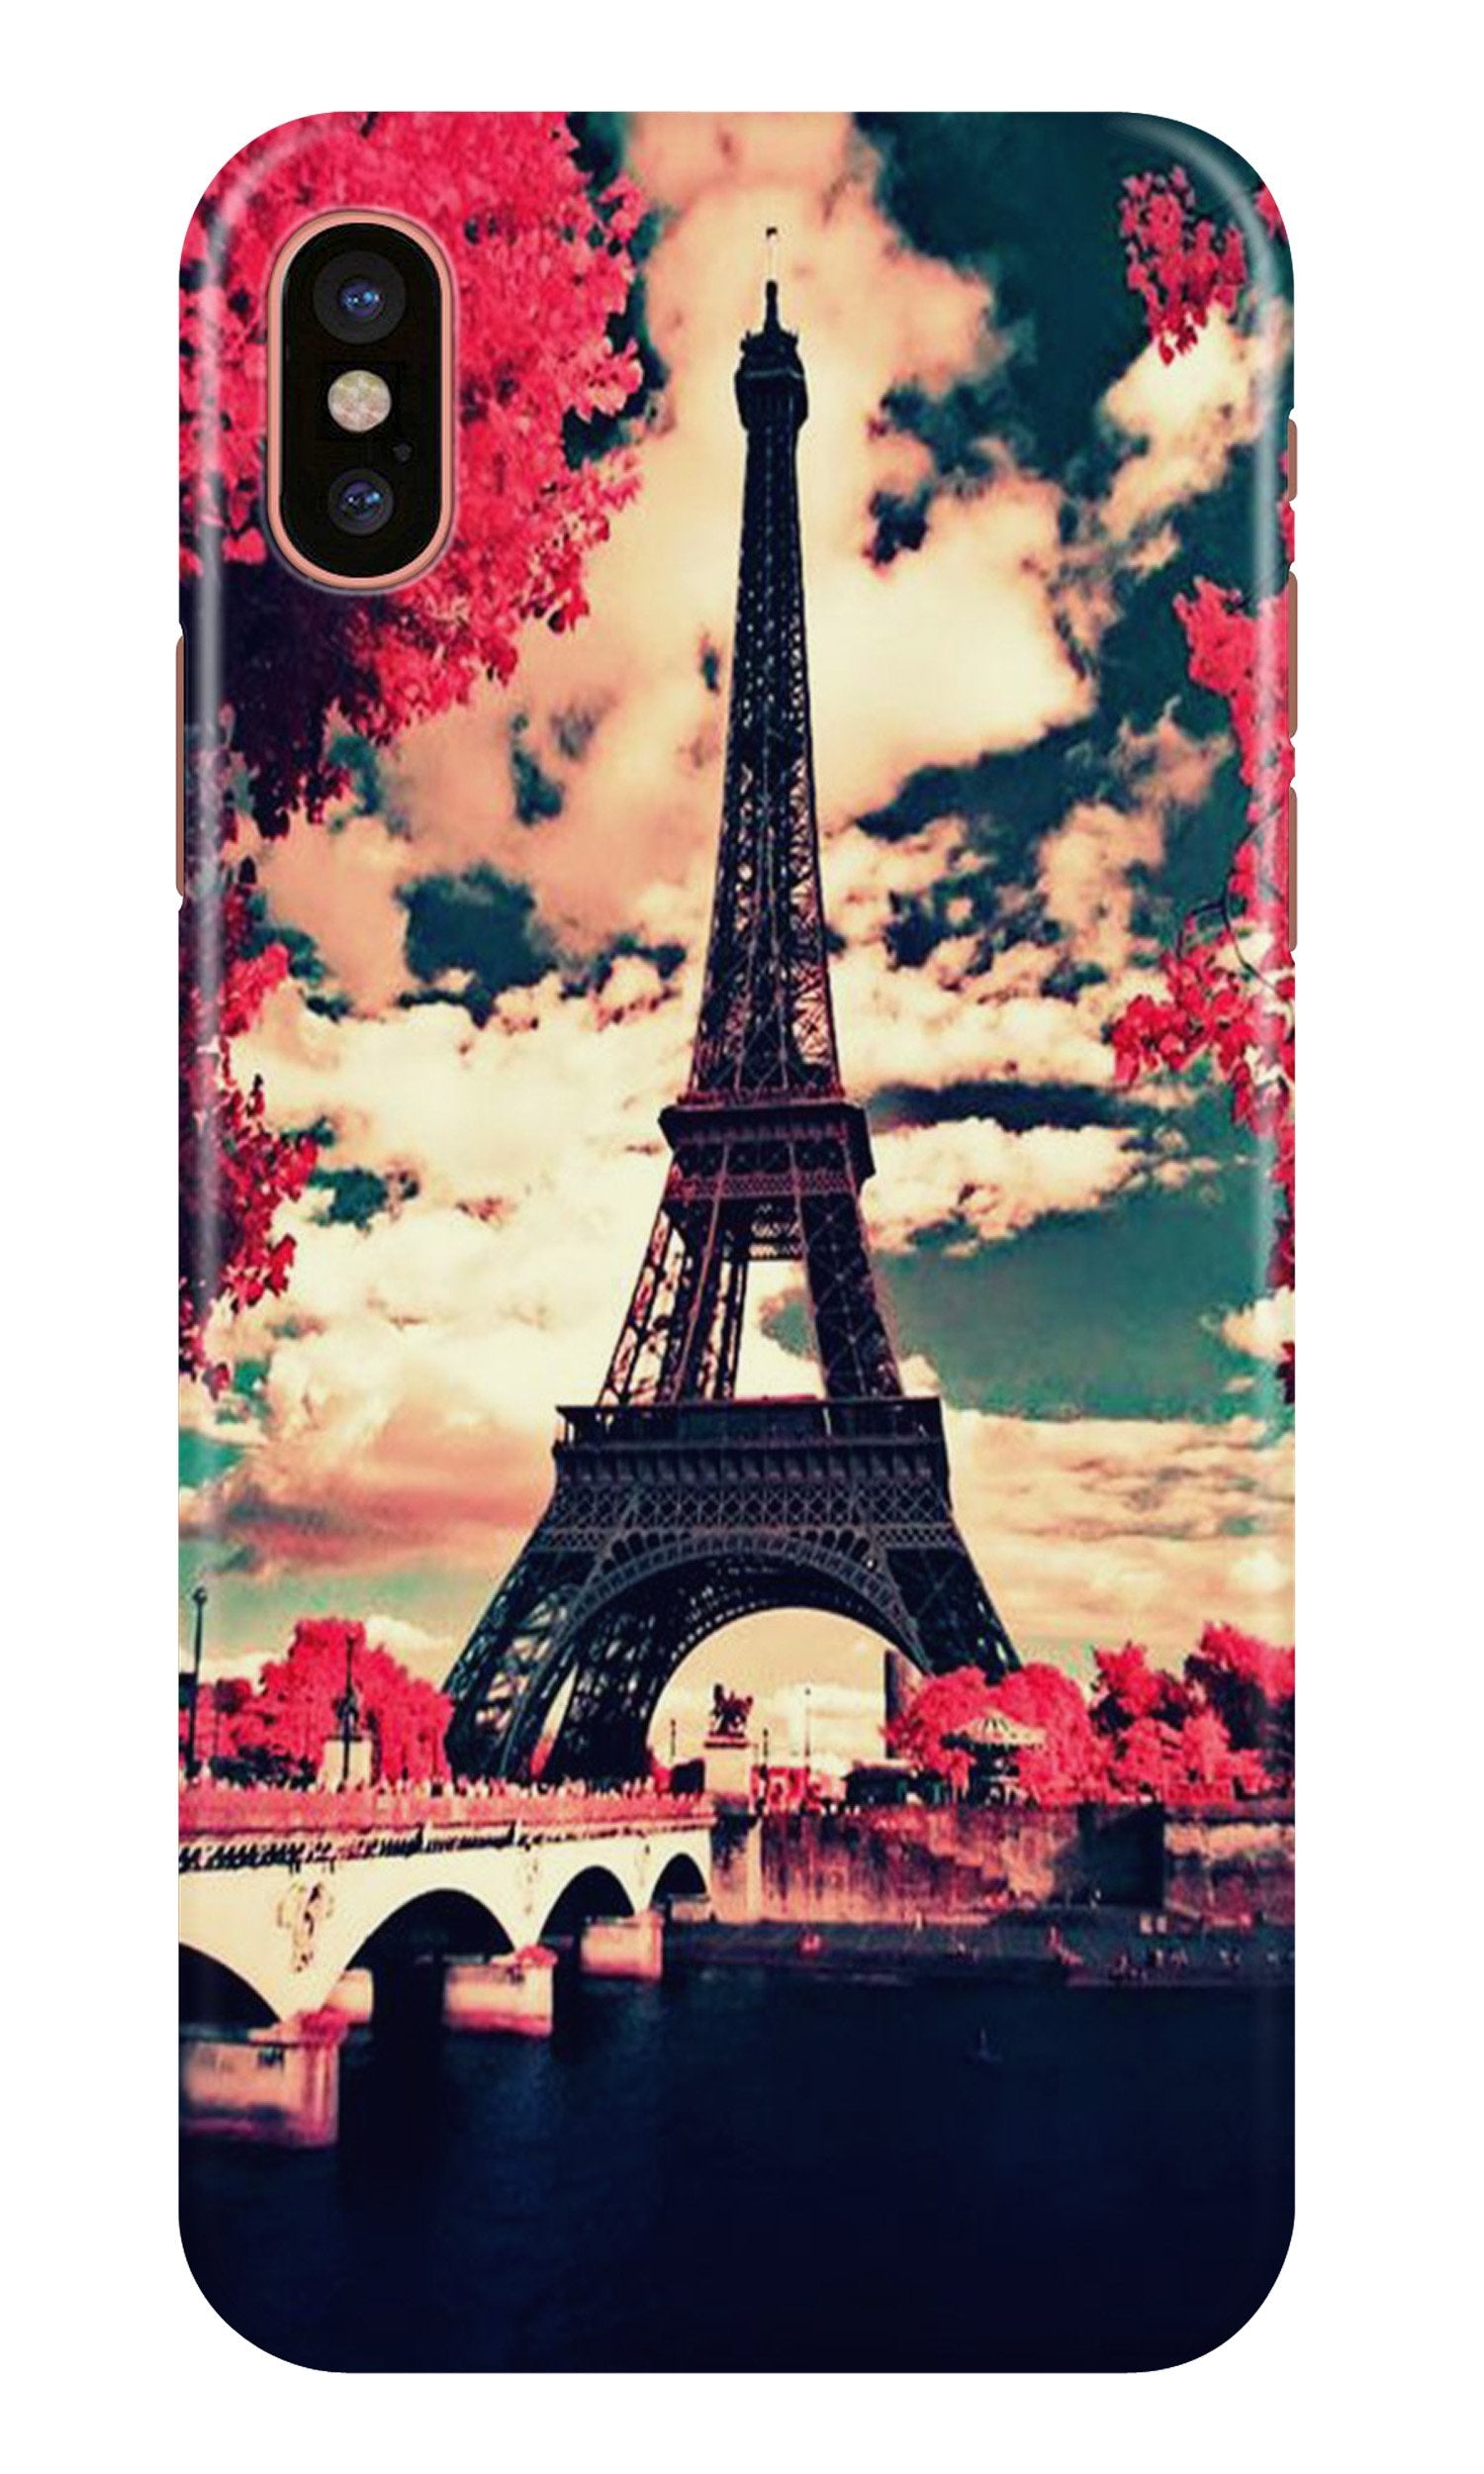 Eiffel Tower Case for iPhone X (Design No. 212)